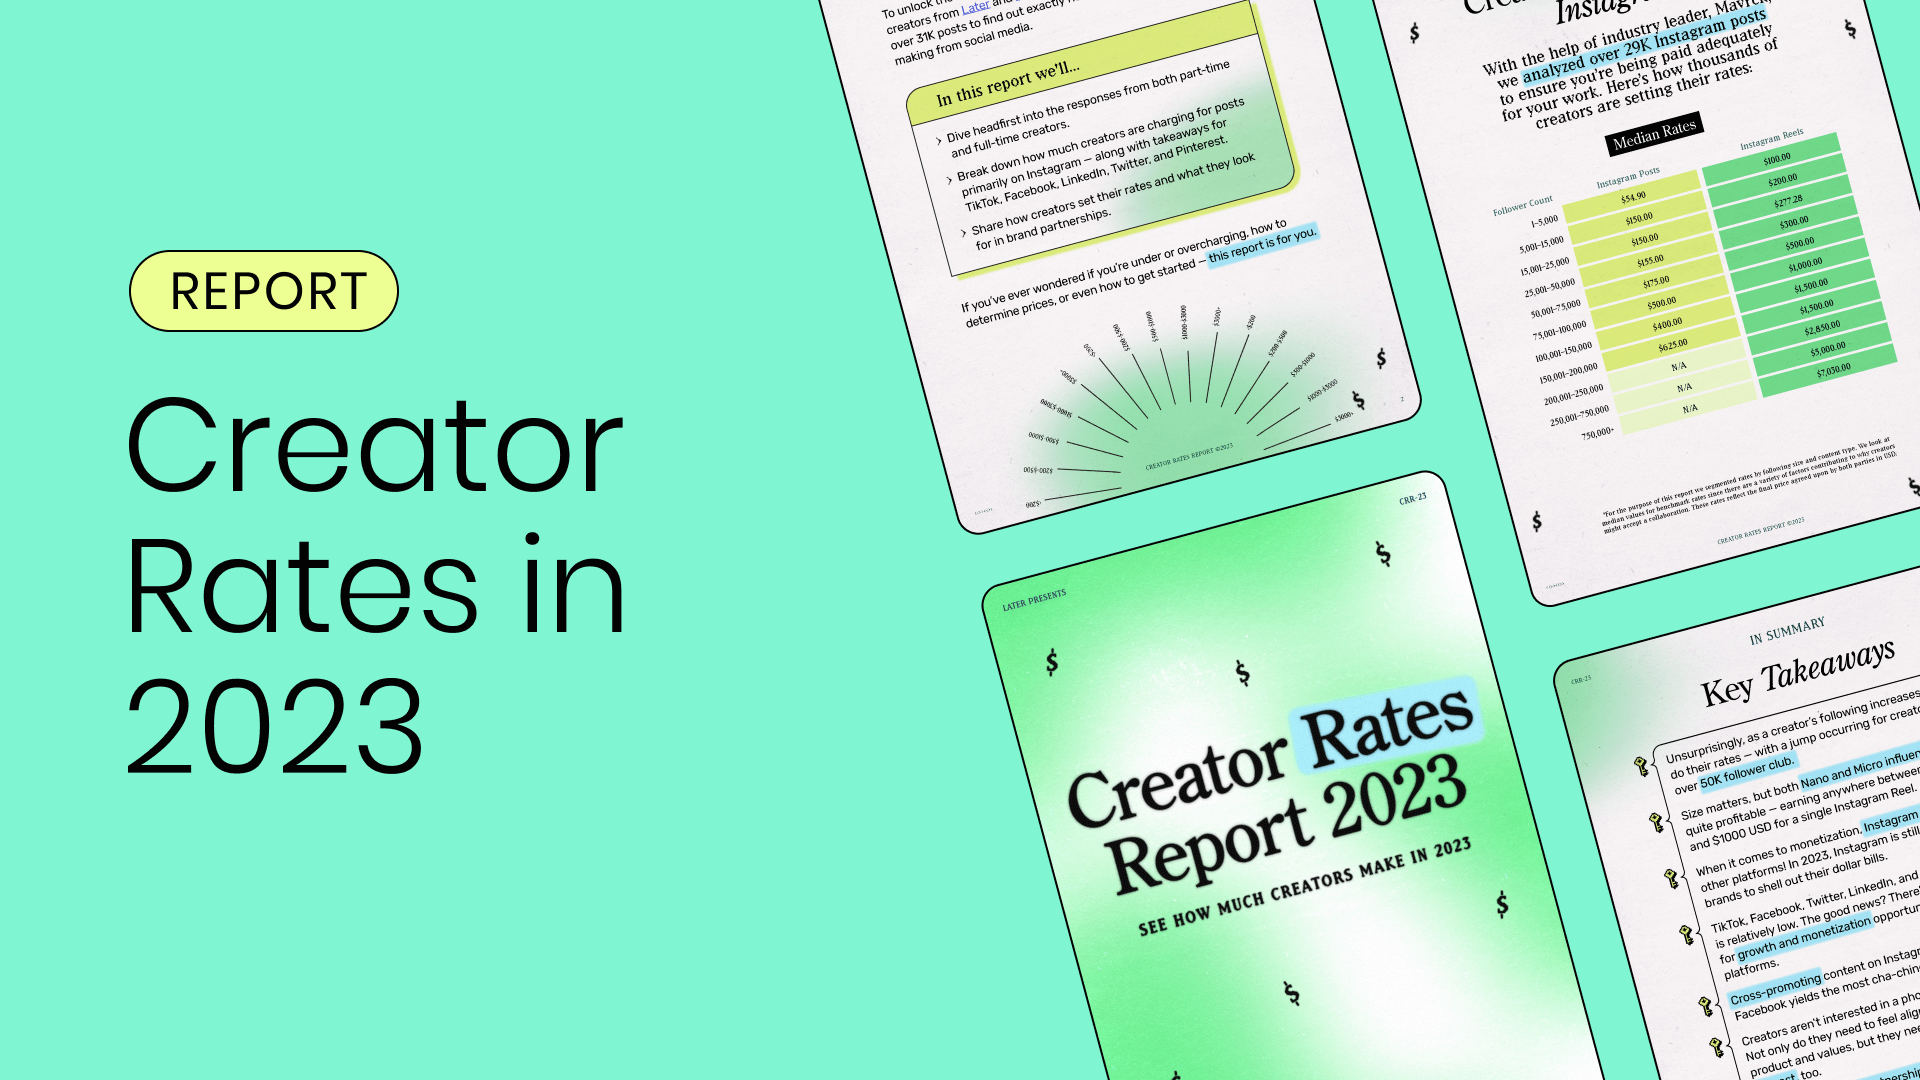 Thumbnail image with the title “creator rates in 2023” beside a collage of sample images of the report